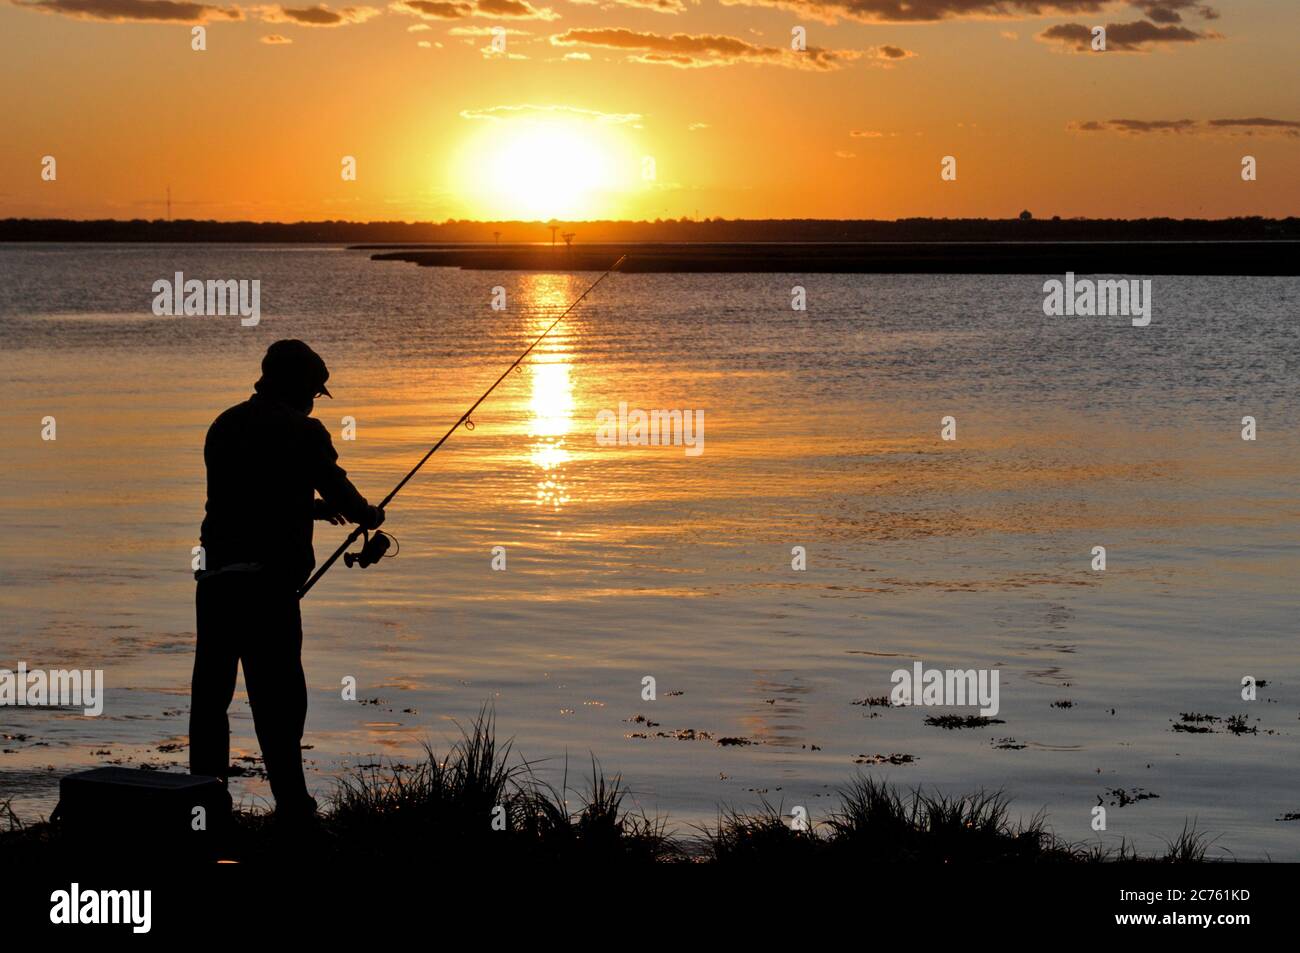 A man is fishing on the lake against the backdrop of sunset. The